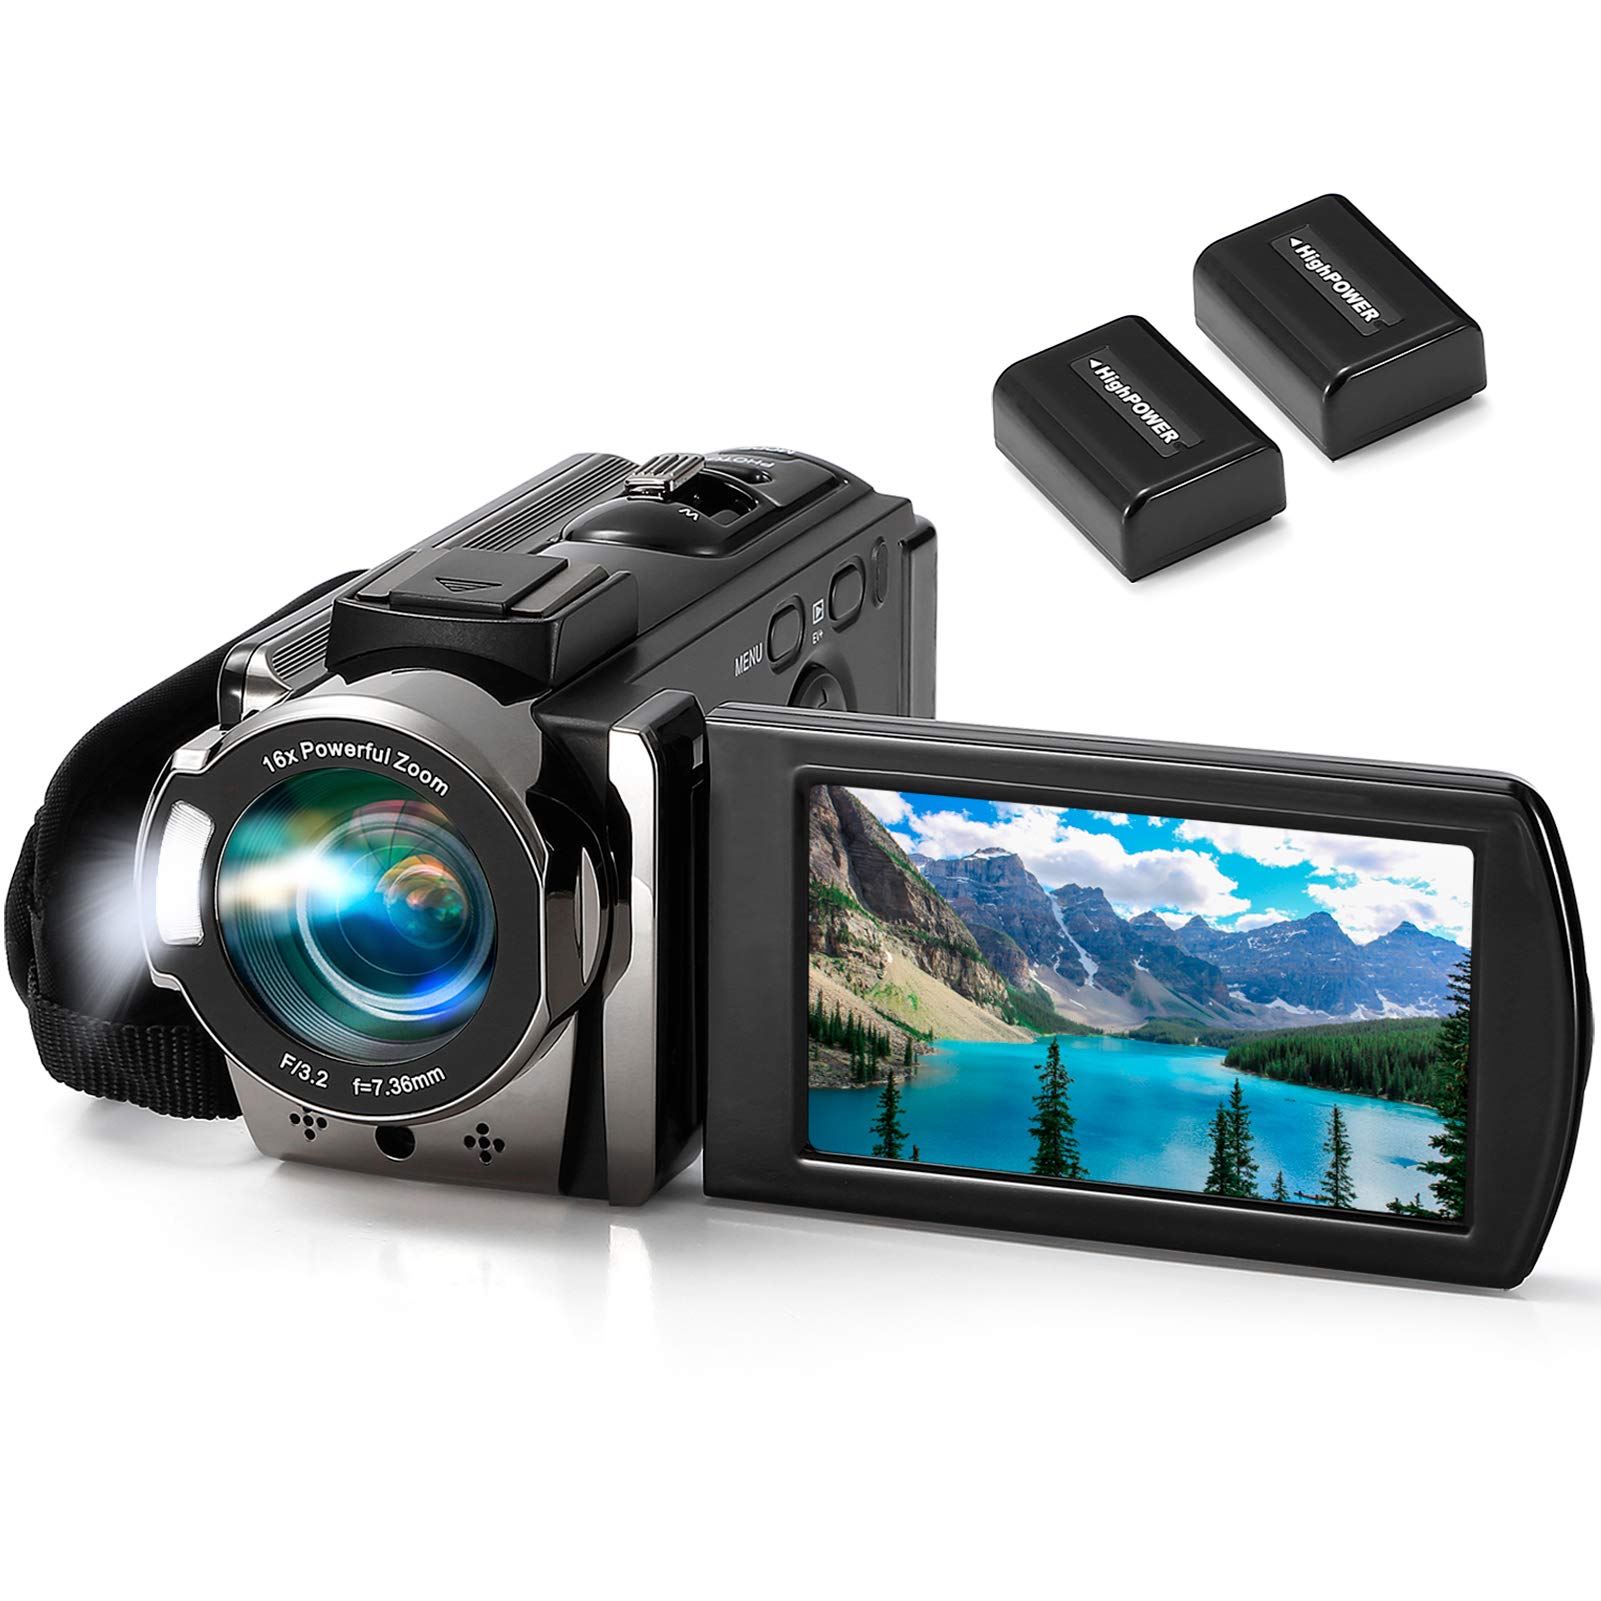 Video Camera Recorder Full HD 1080P 15FPS 24MP 270 Degree Rotation LCD with 2 Batteries(Black)